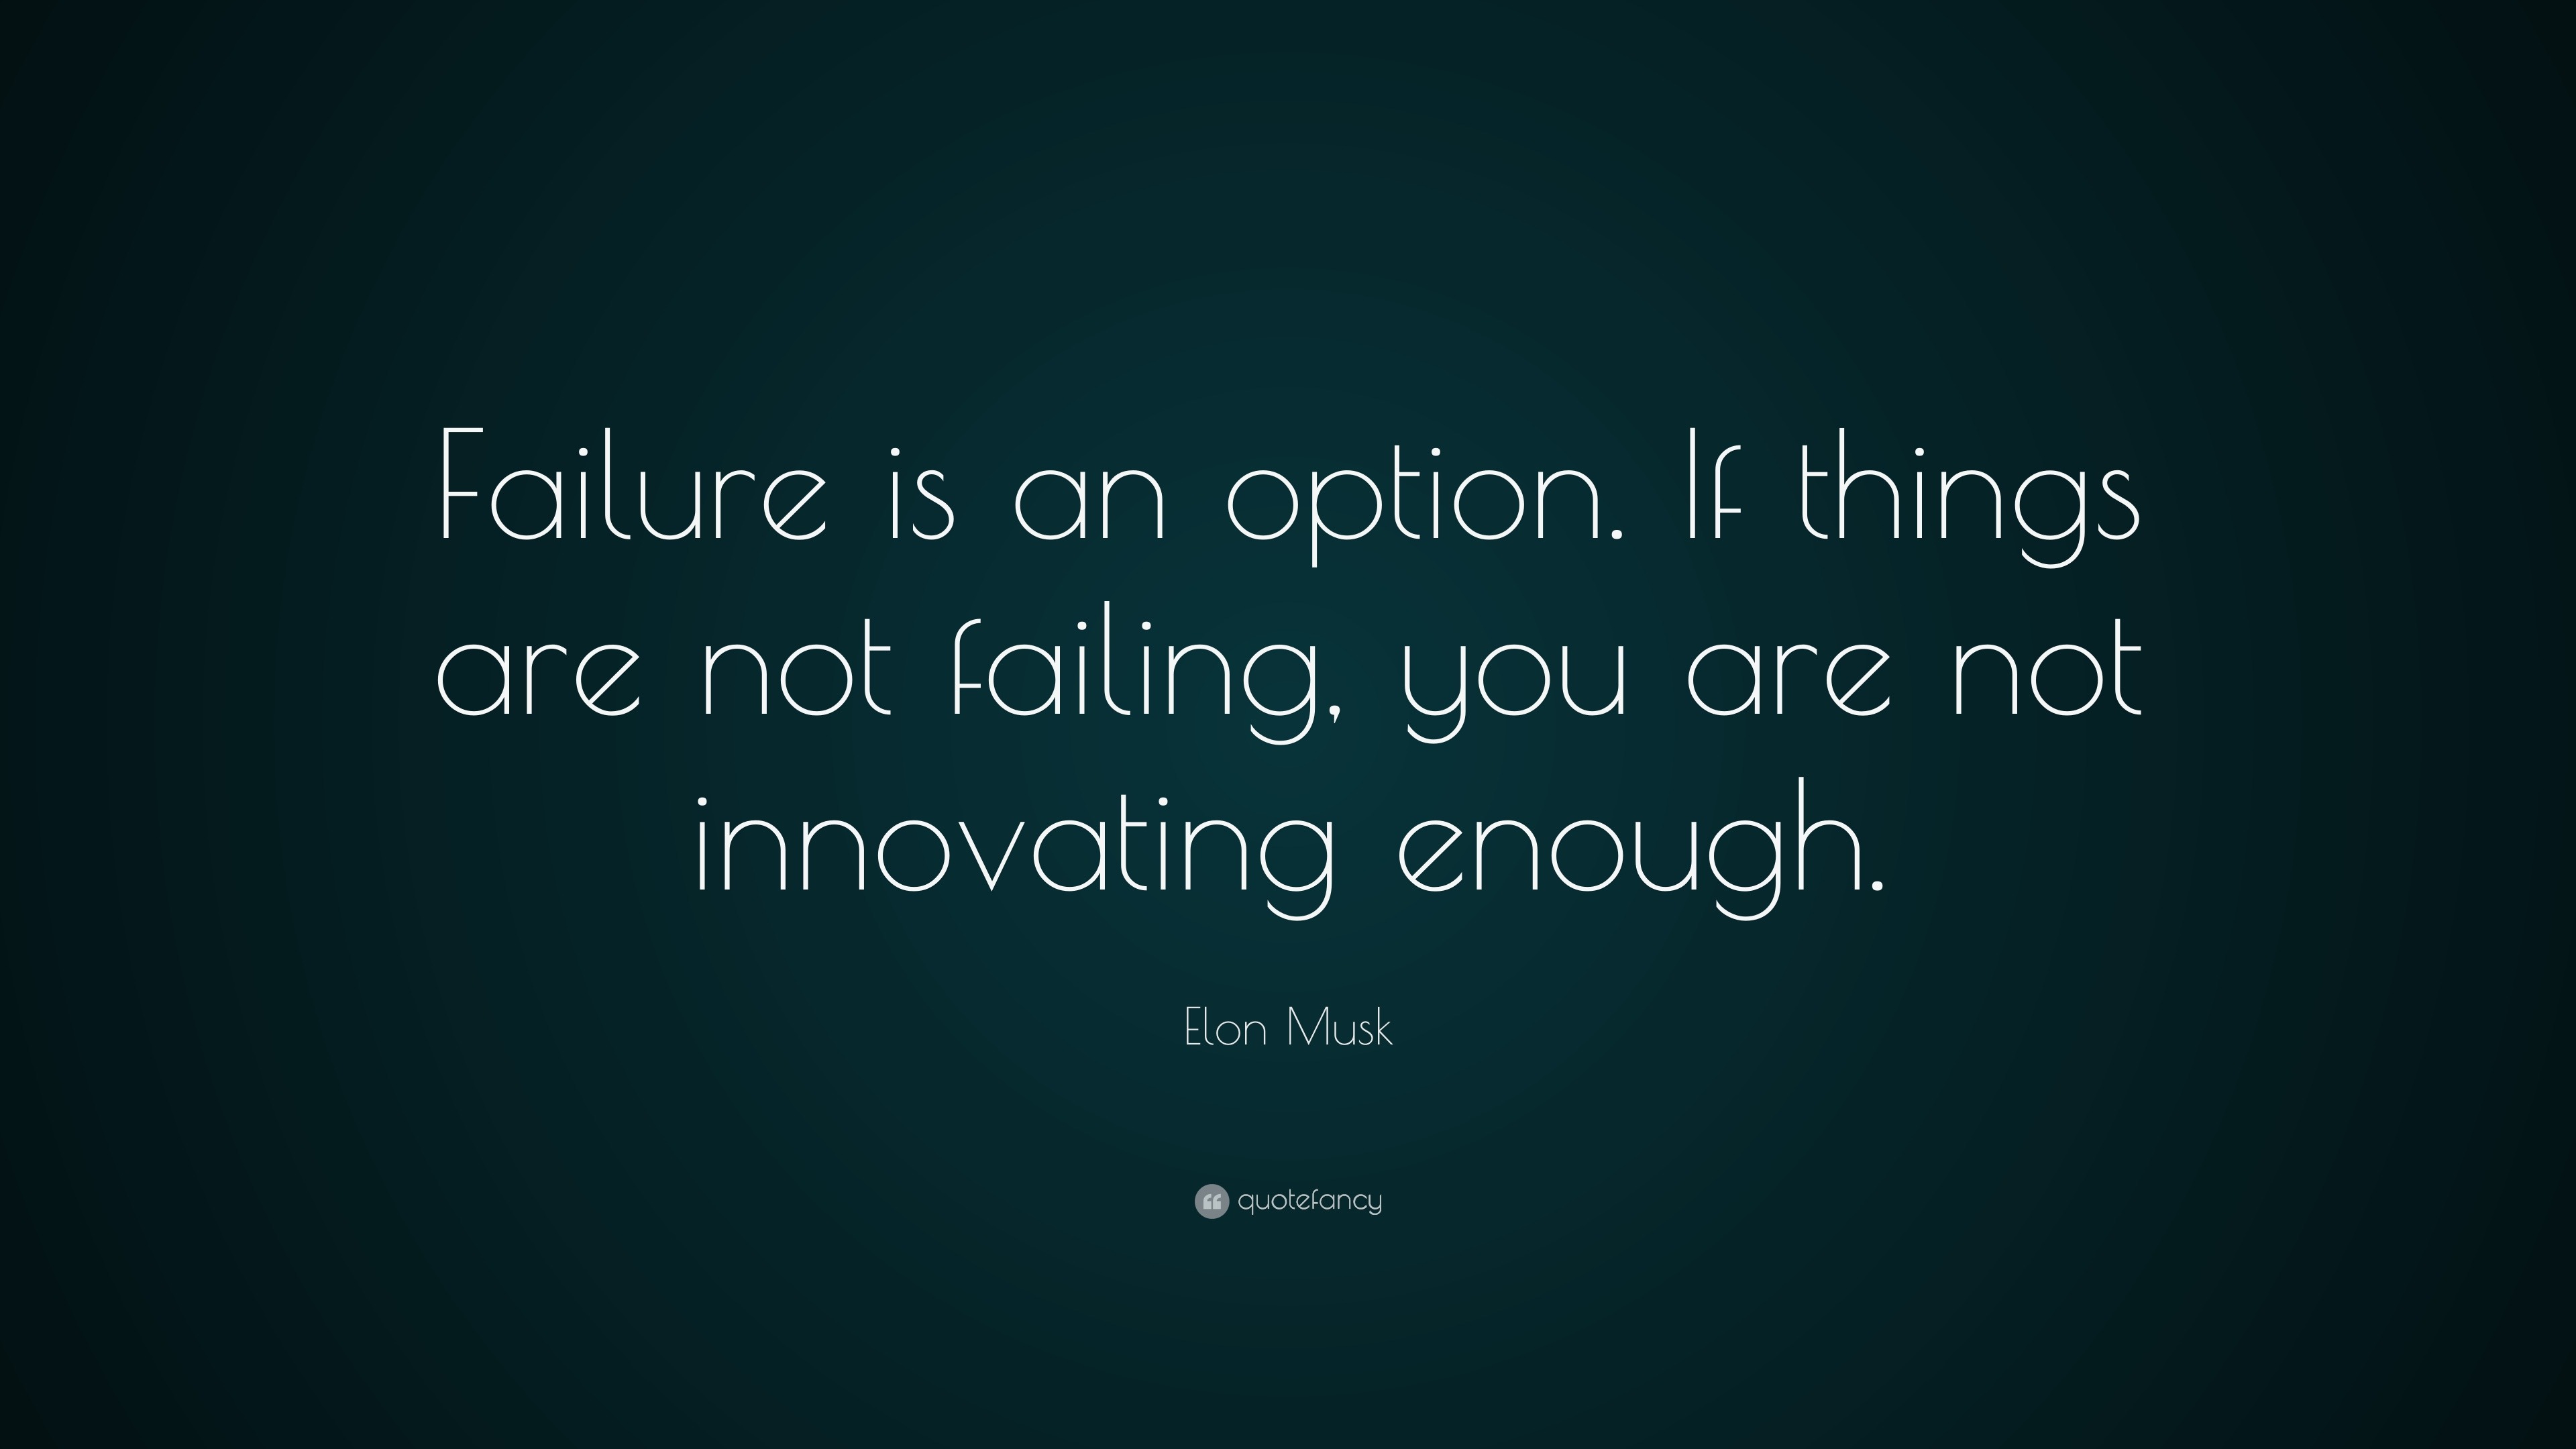 Elon Musk Quote: “Failure is an option. If things are not failing, you ...